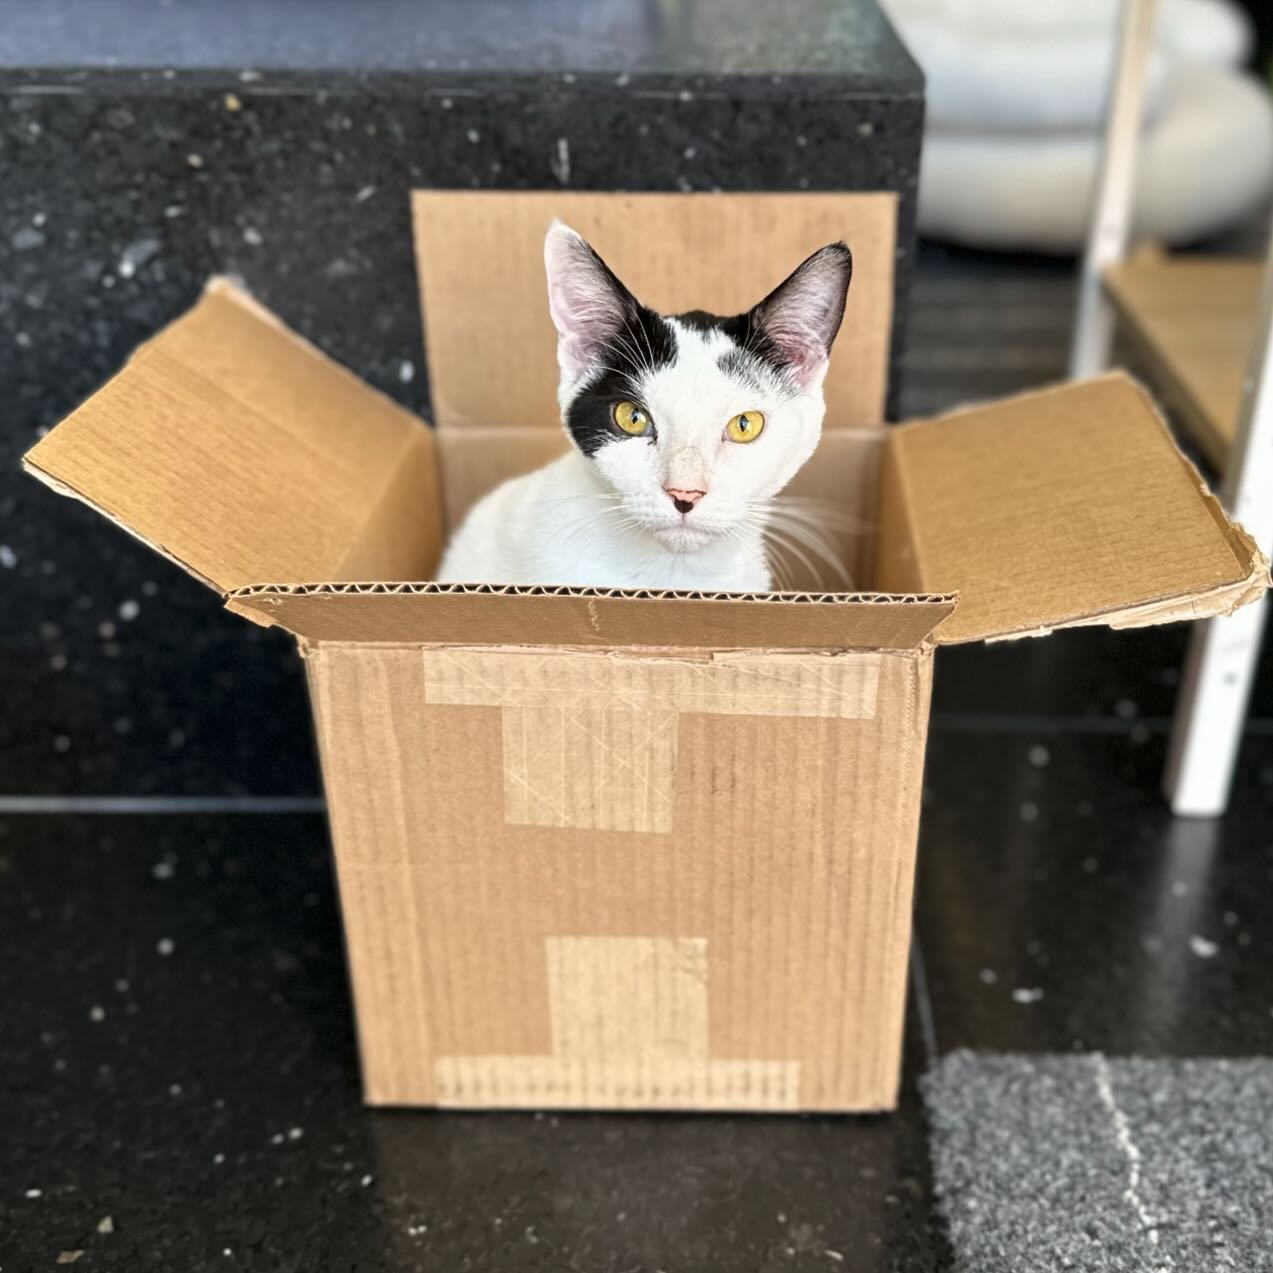 Forest was trying out the new box this morning. He says it&rsquo;s the perfect size! 📦✅ Forest is the sweetest boy. He loves other cats and has a very quiet demeanor.  He&rsquo;s a true friend to all so if you&rsquo;re looking for a buddy for your e